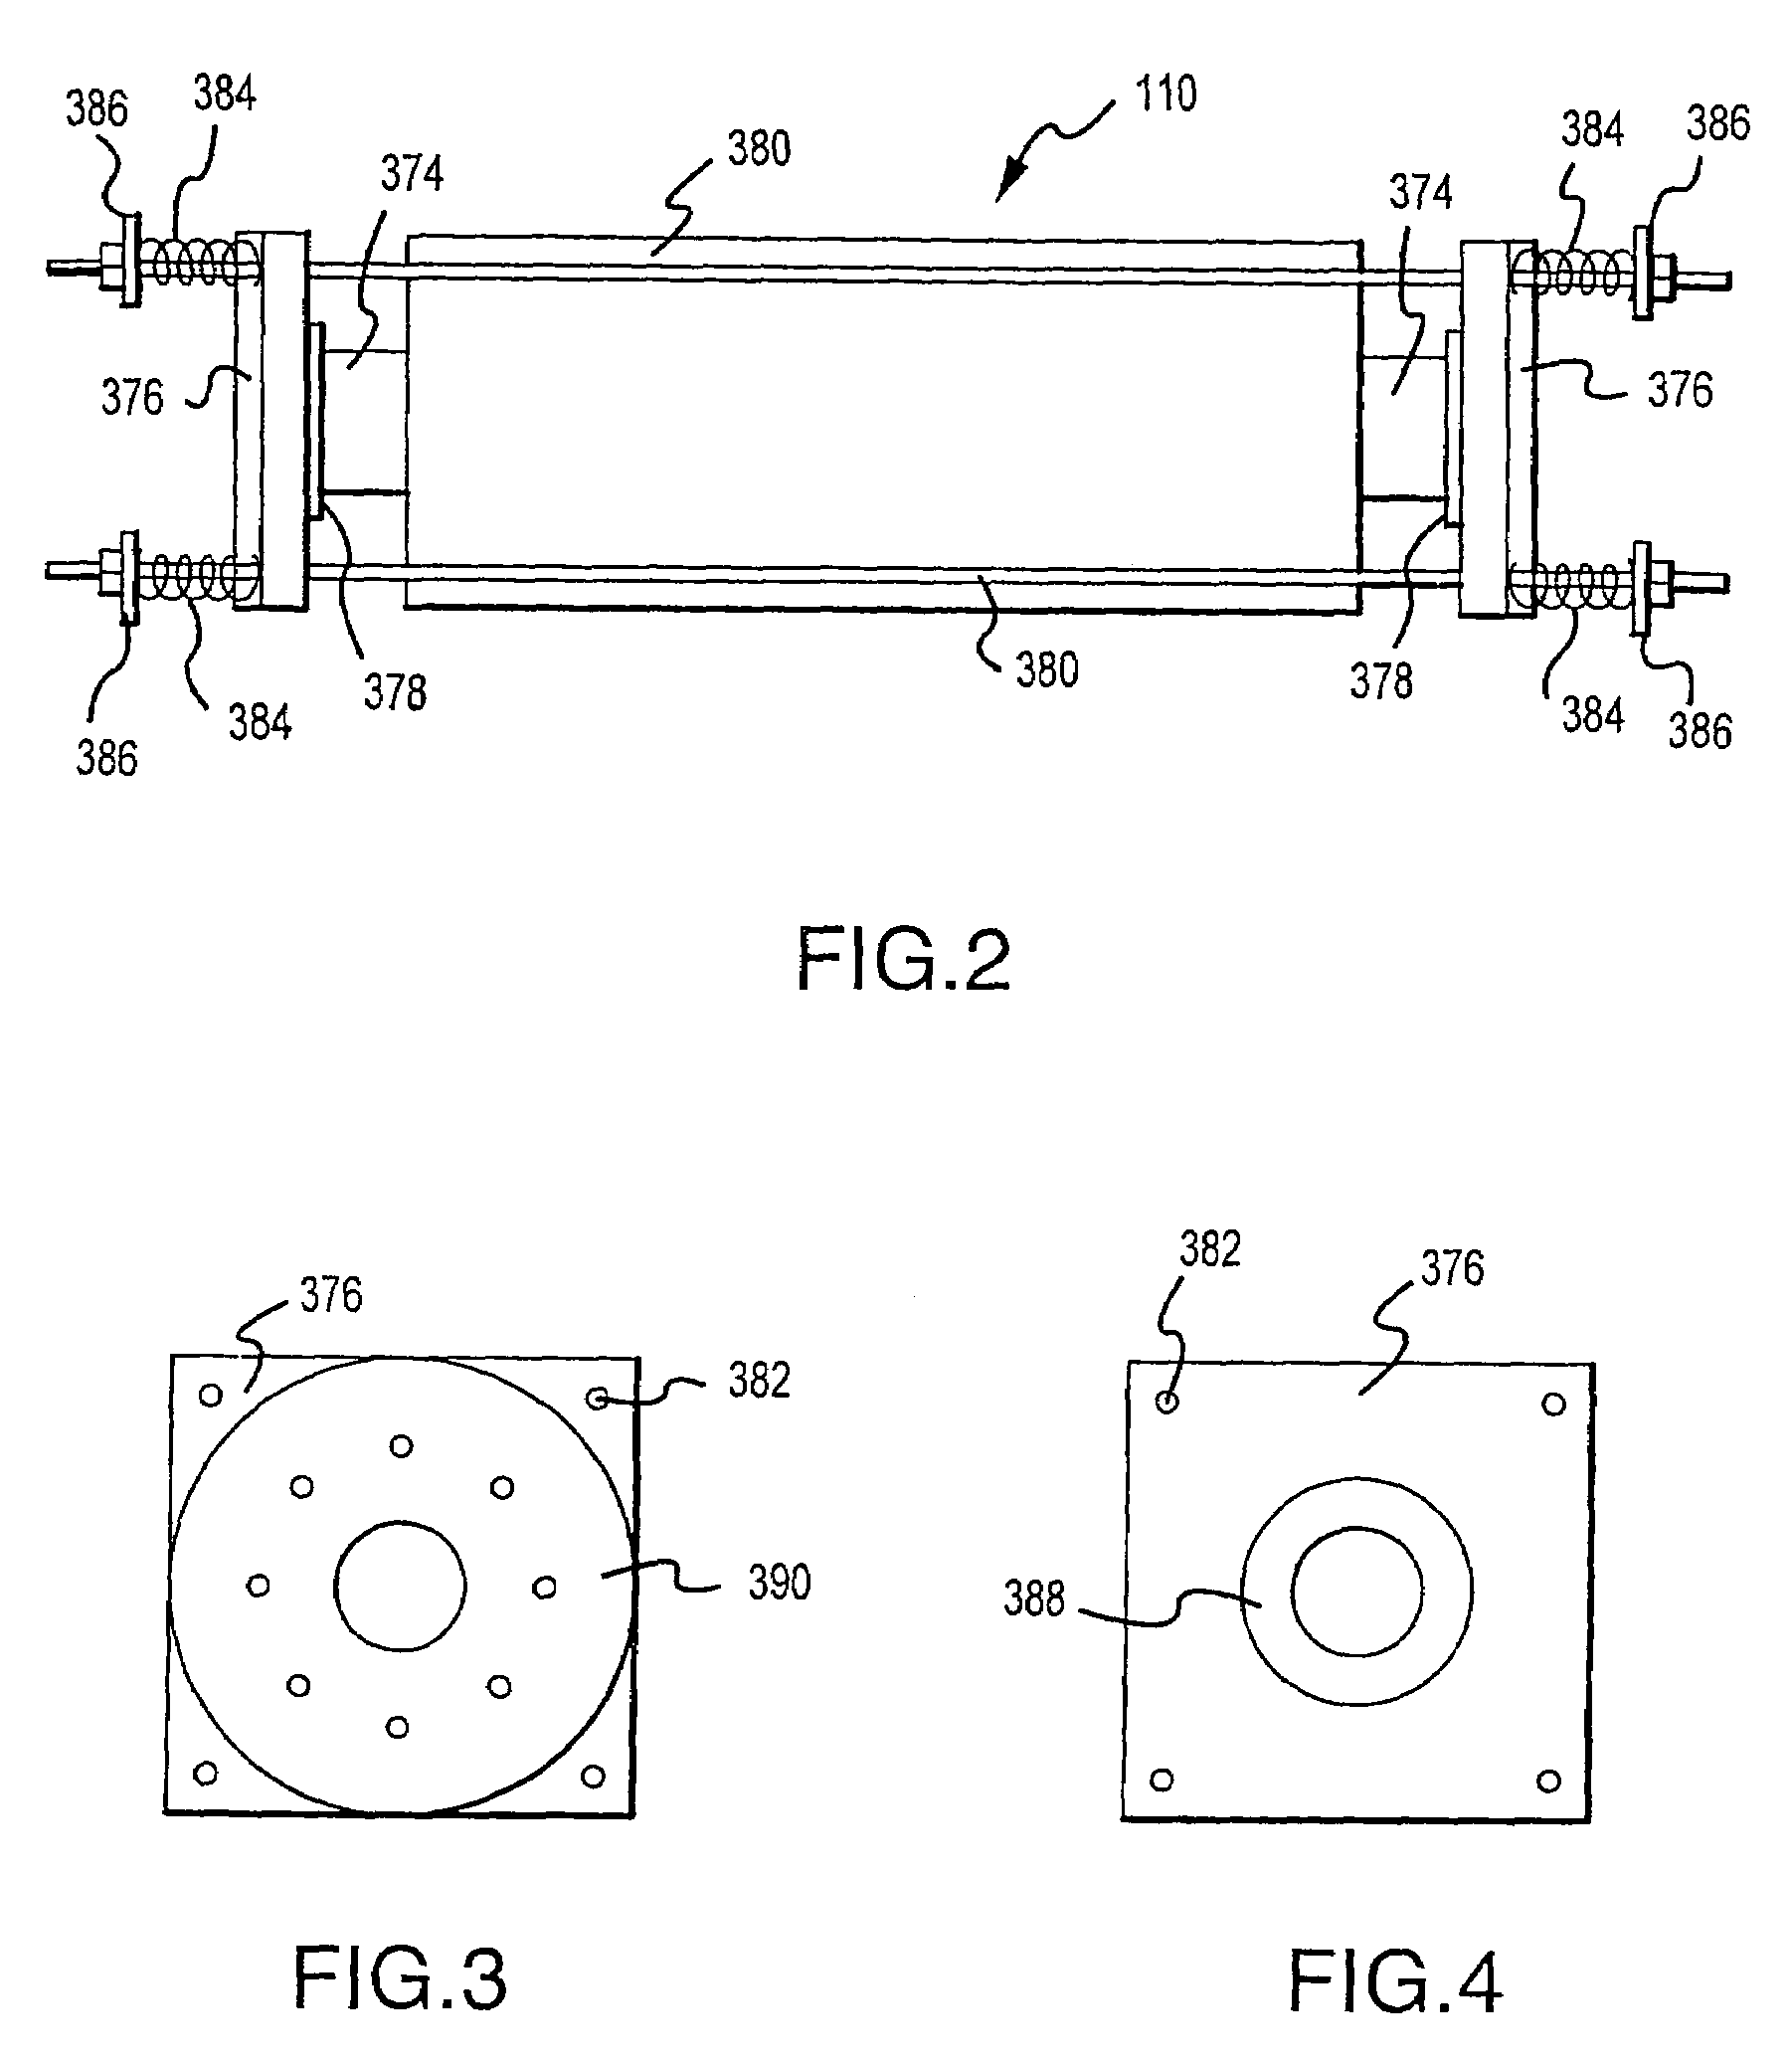 Palladium-containing particles, method and apparatus of manufacture, palladium-containing devices made therefrom